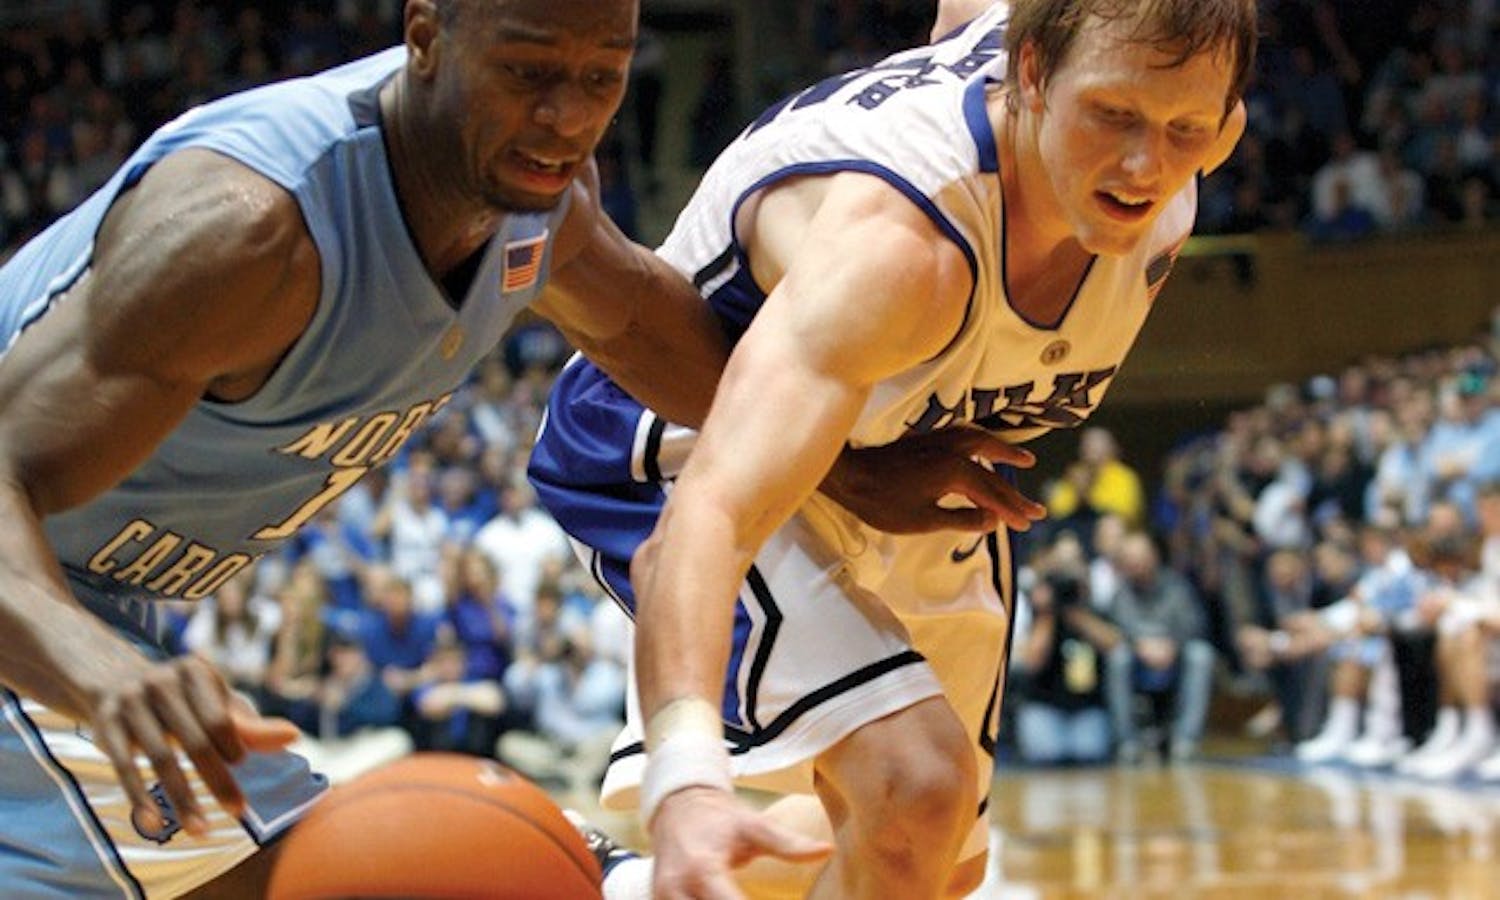 Kyle Singler would profit more from staying at Duke another year, Joe Drews writes.